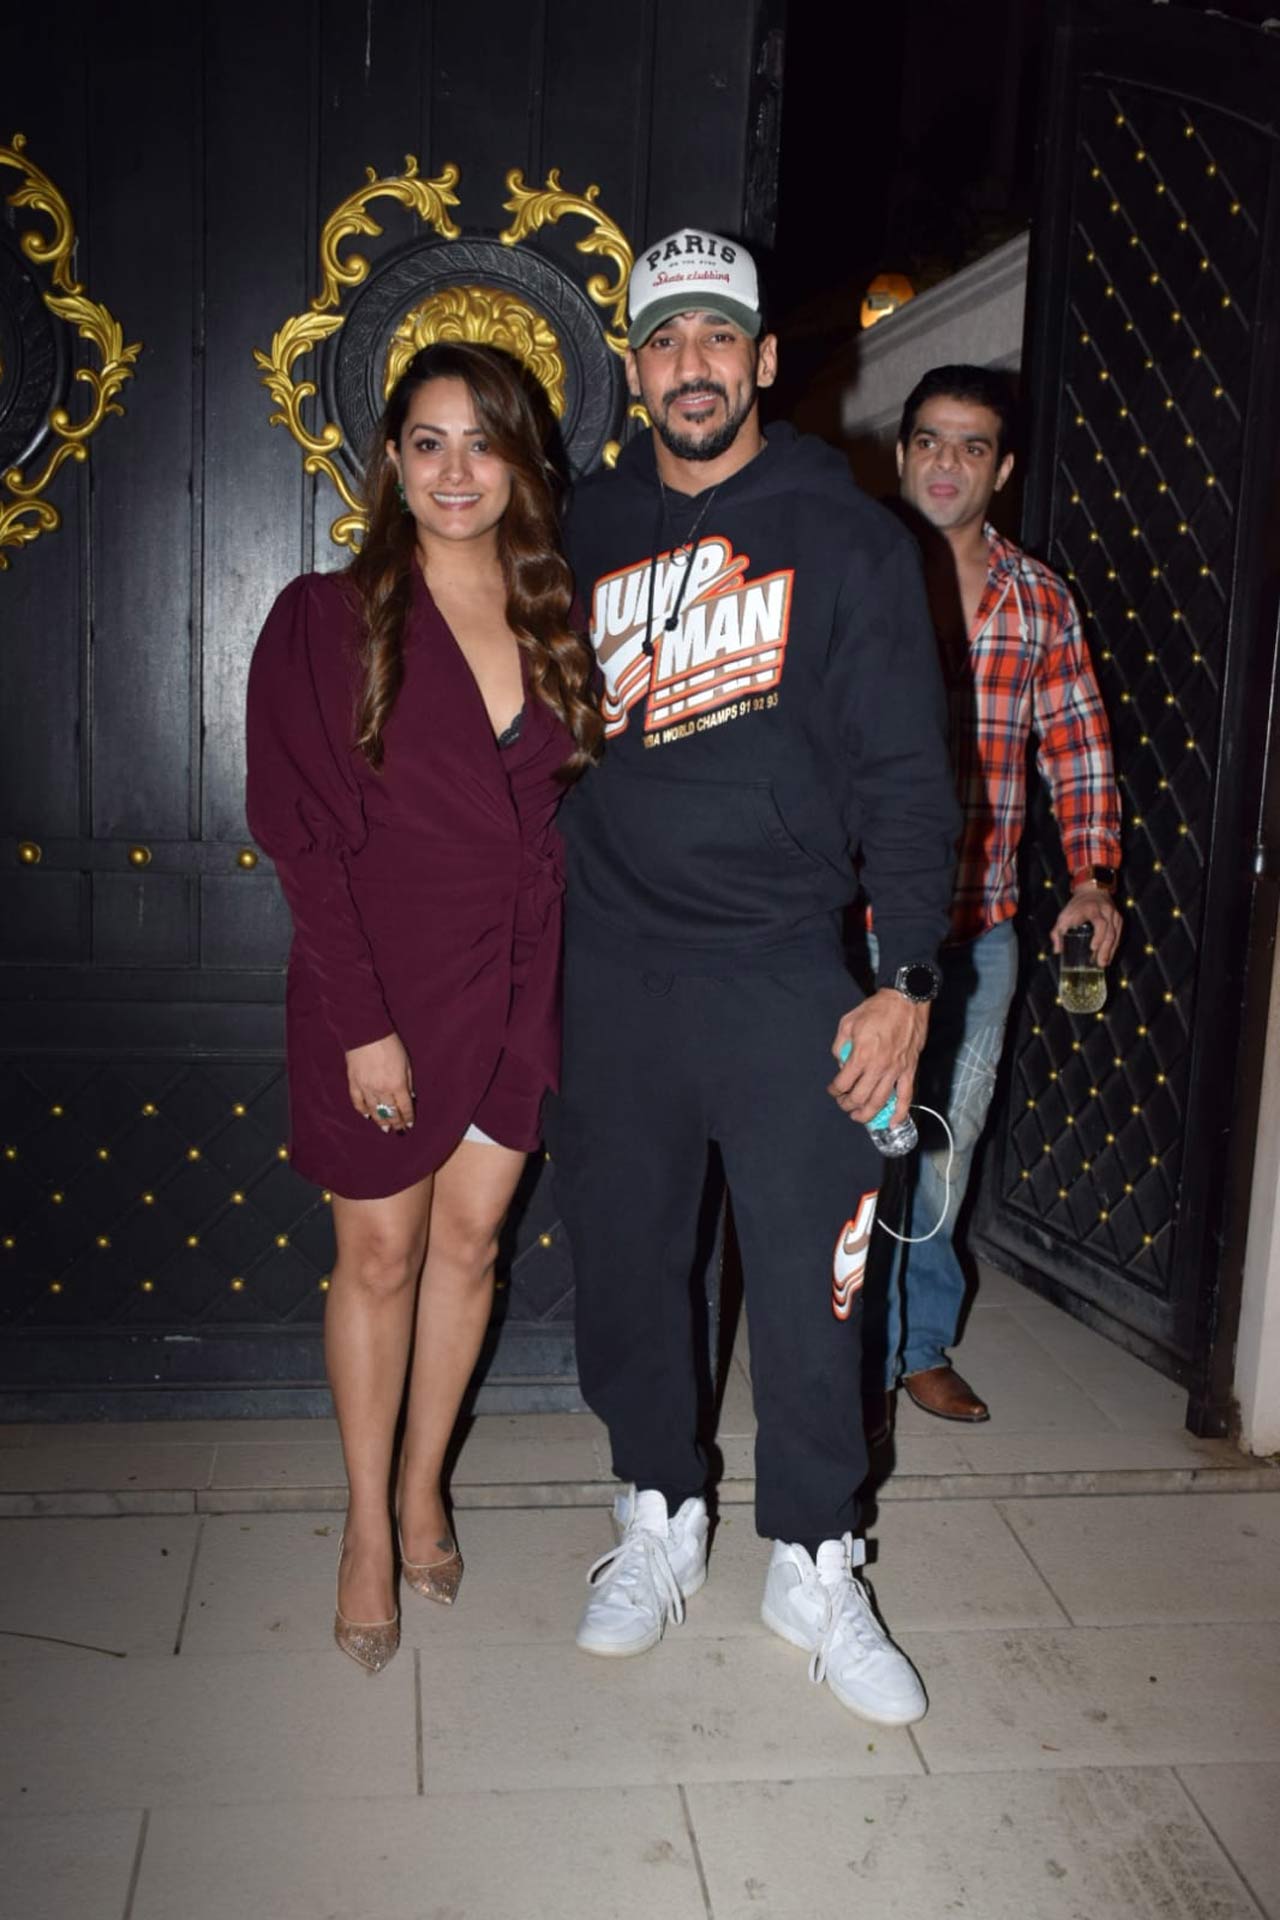 Anita Hassanandani and Rohit Reddy were snapped together as they left Ekta Kapoor's bash post-midnight. Anita stunned in a burgundy outfit whereas Rohit Reddy was clicked at his casual best.